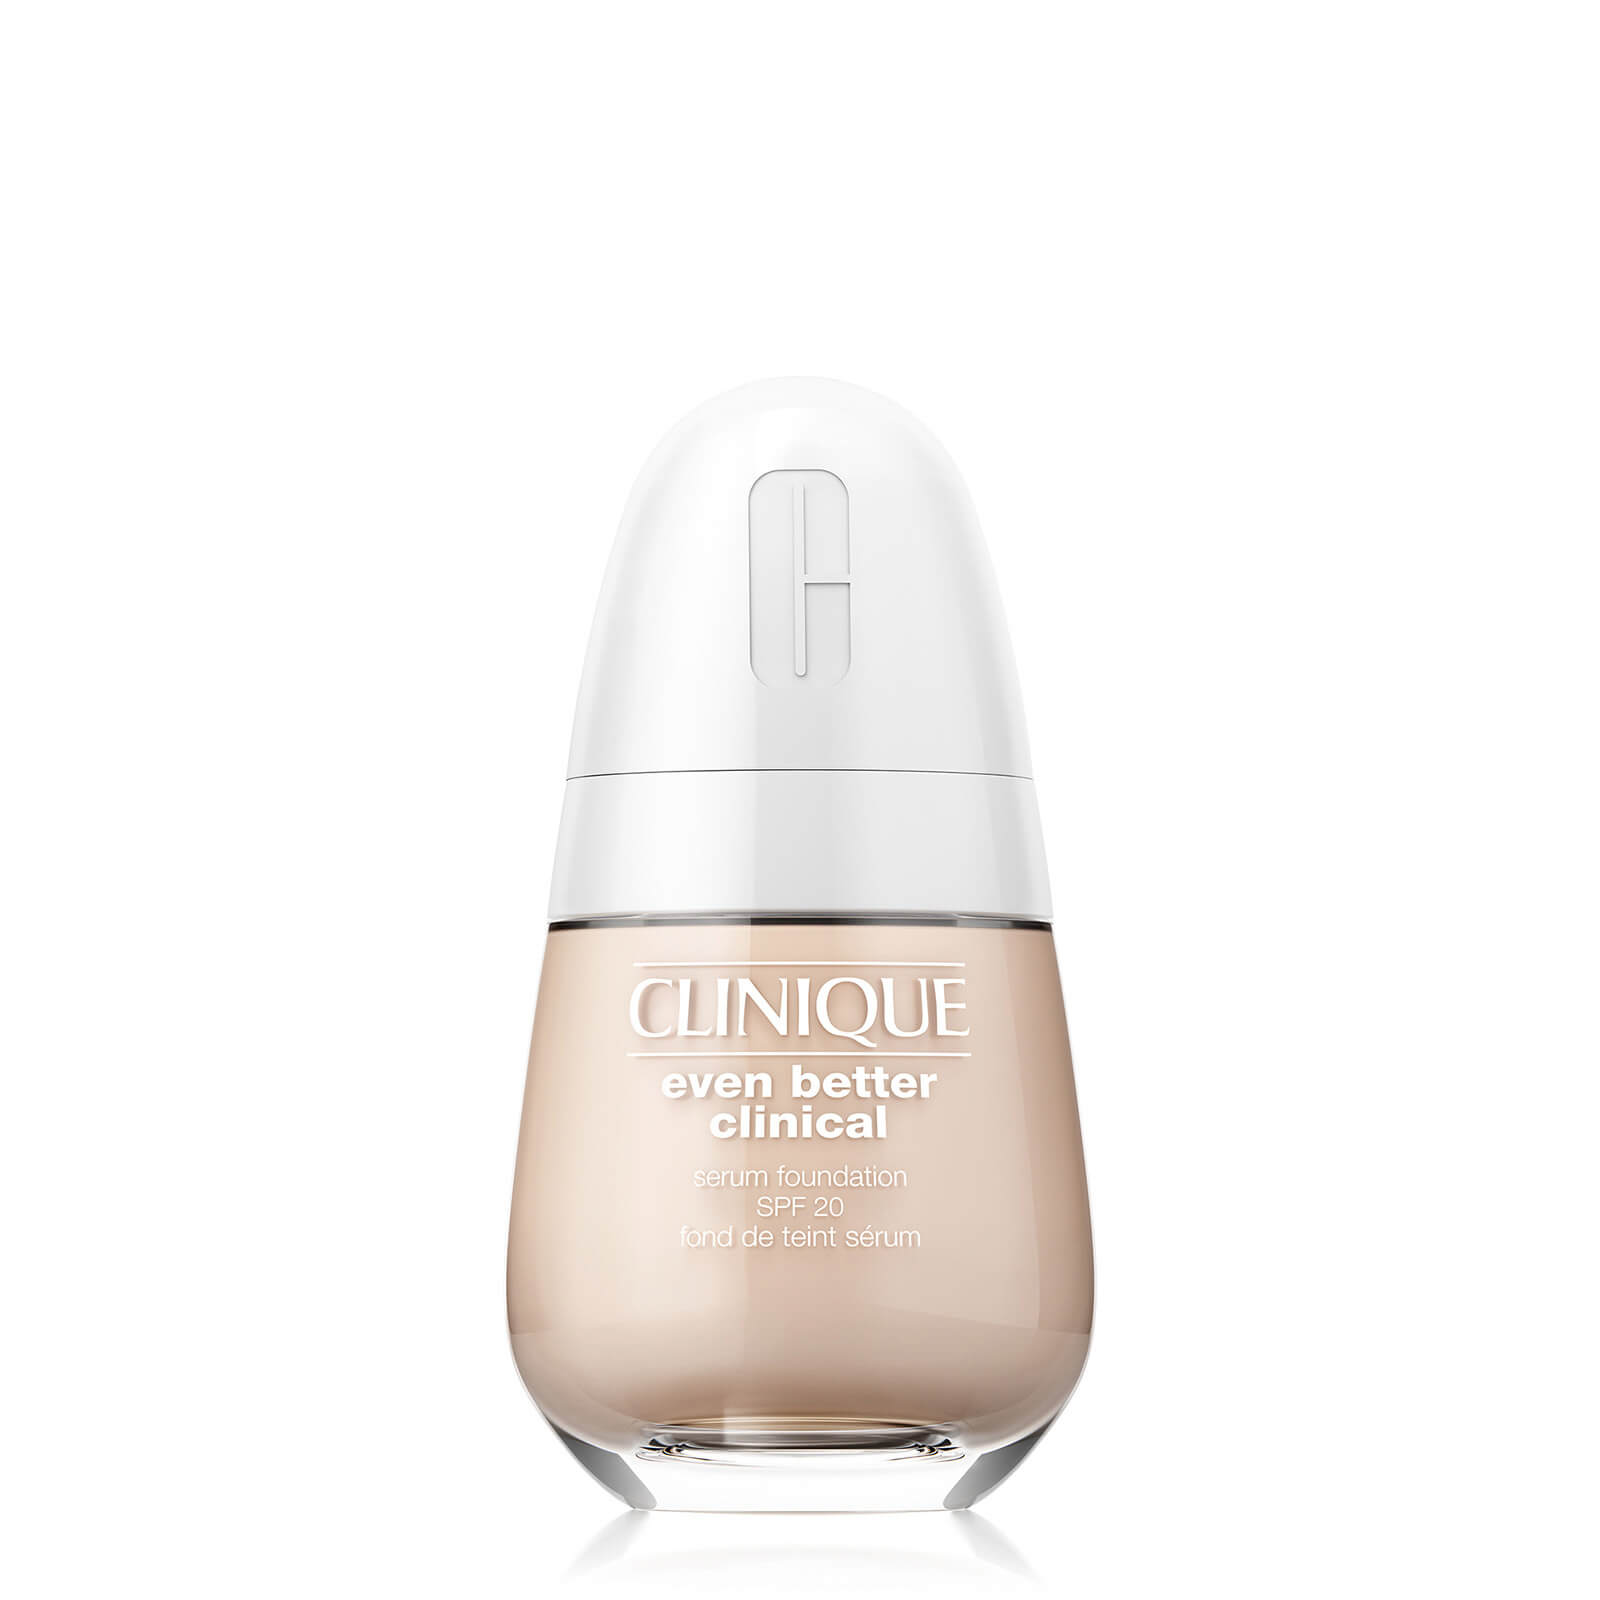 Clinique Even Better Clinical Serum Foundation SPF20 30ml (Various Shades) - Flax